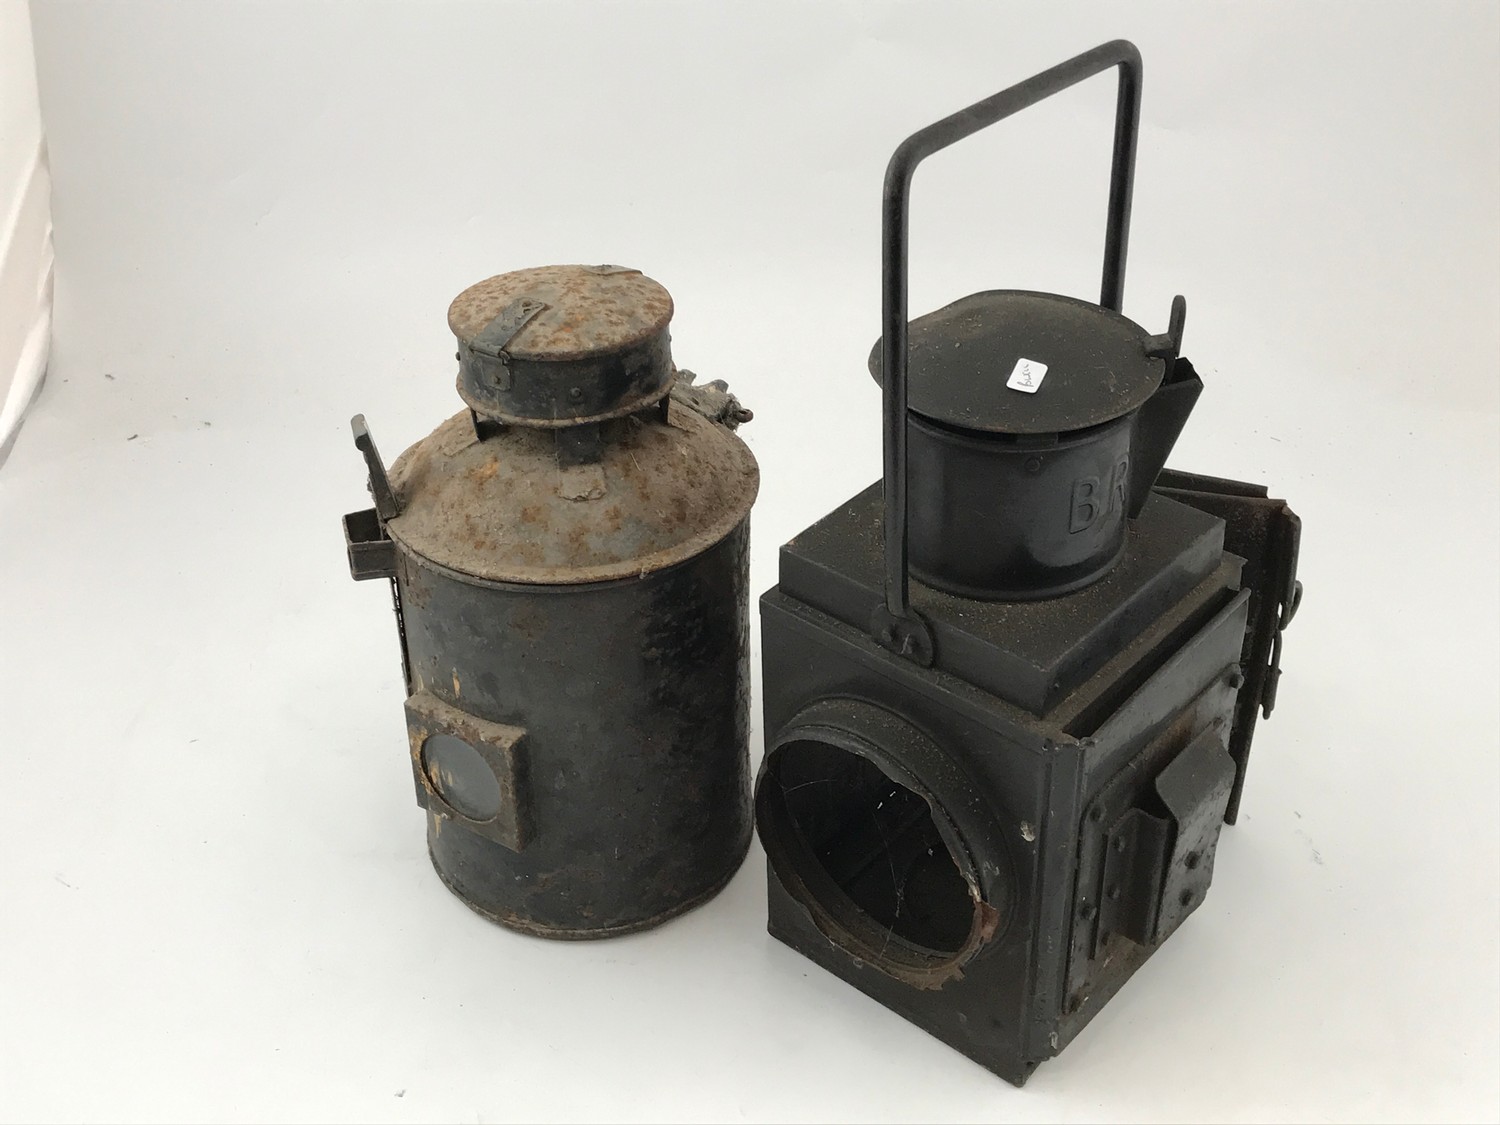 frágil Claraboya Final TWO OLD RAILWAY LAMPS , BR STANDARD LOCOMOTIVE OR TAIL LAMP IN BLACK WITH  SIDE BRACKETS MISSING GLAS